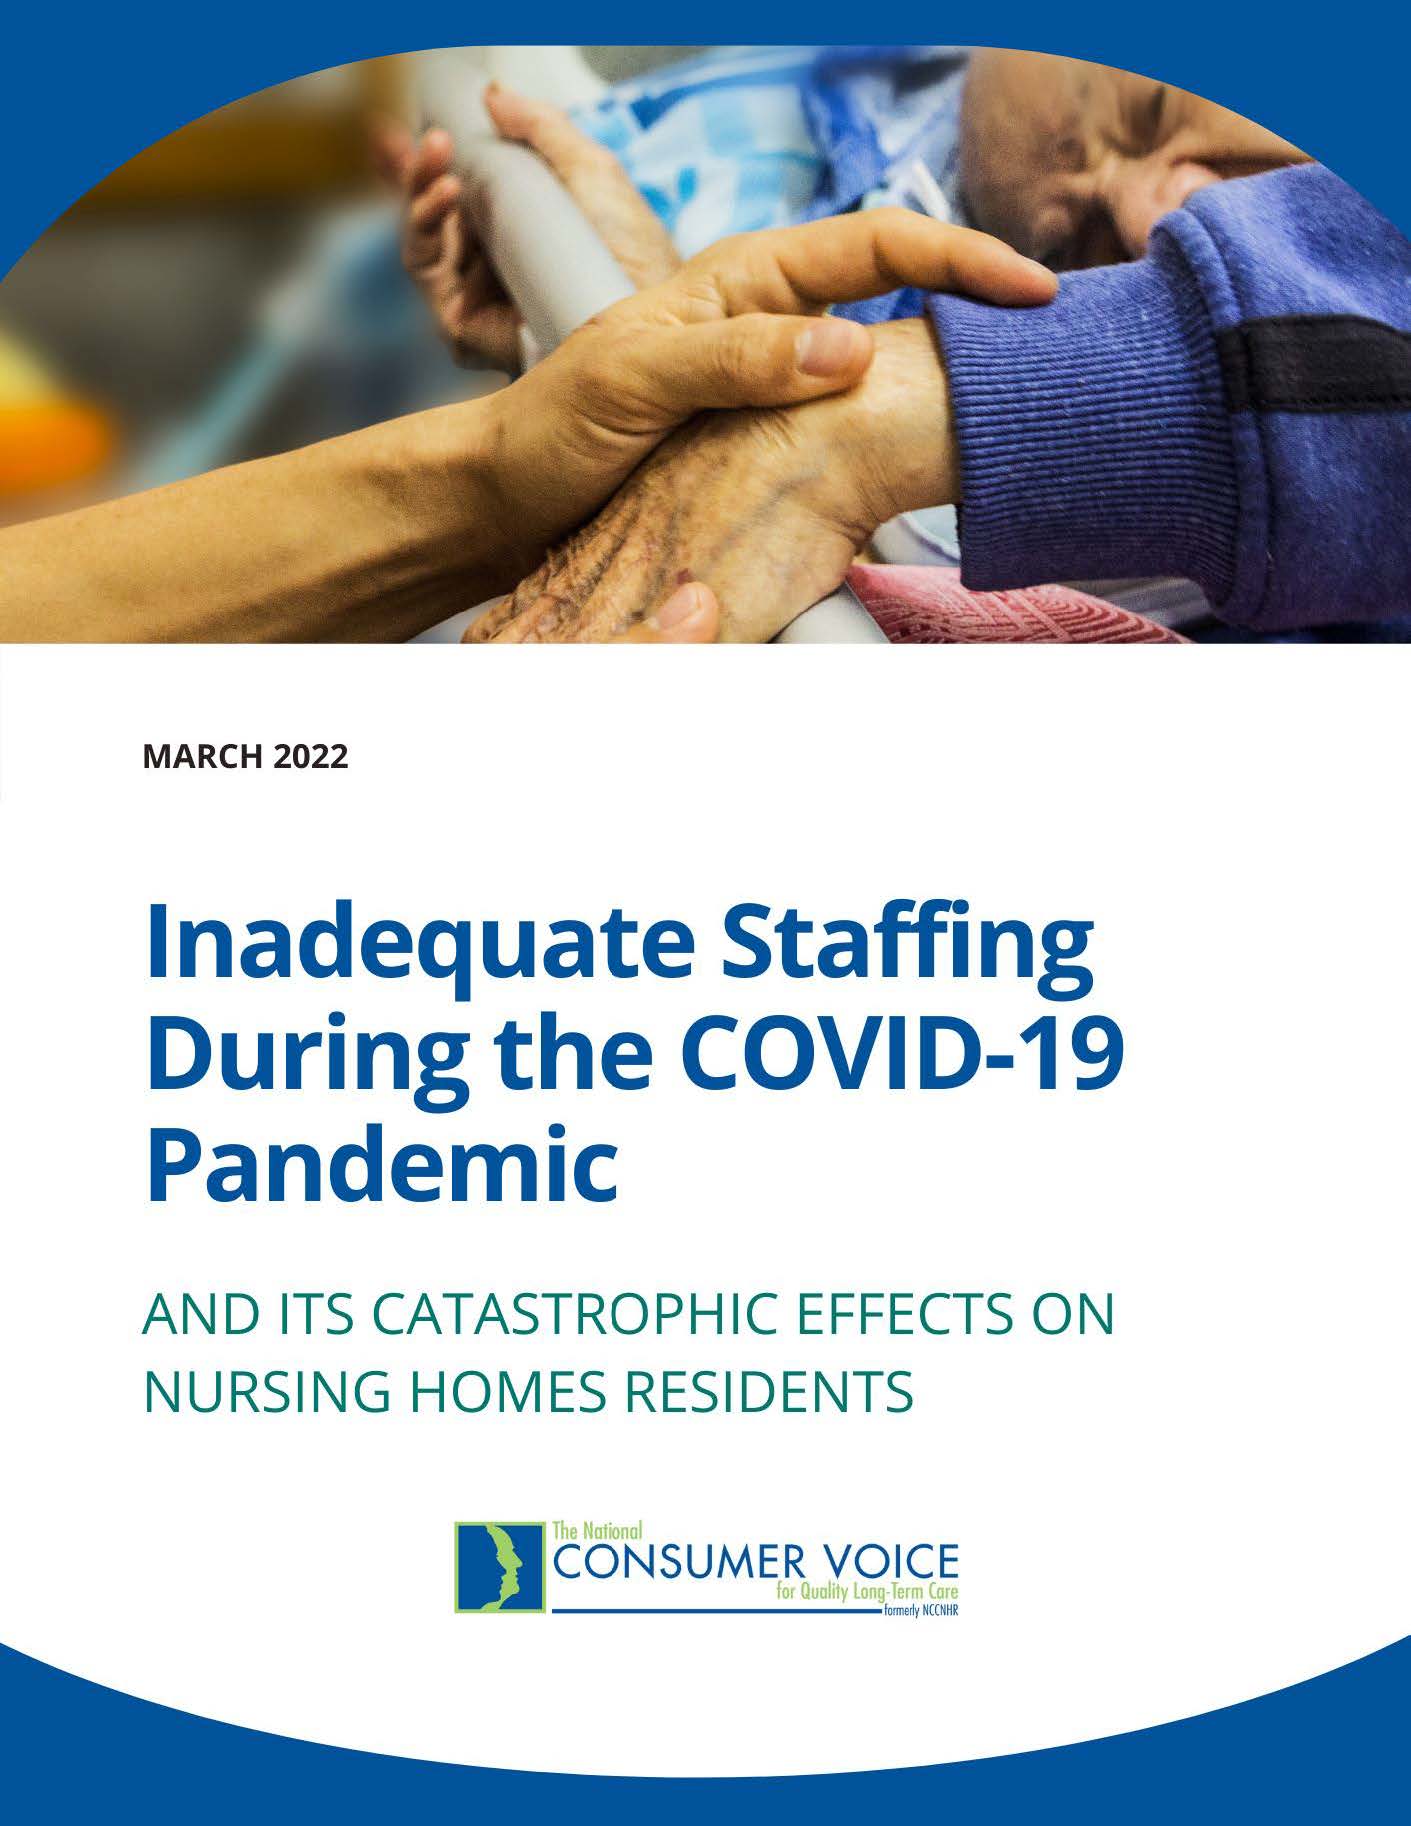 Inadequate Staffing Report